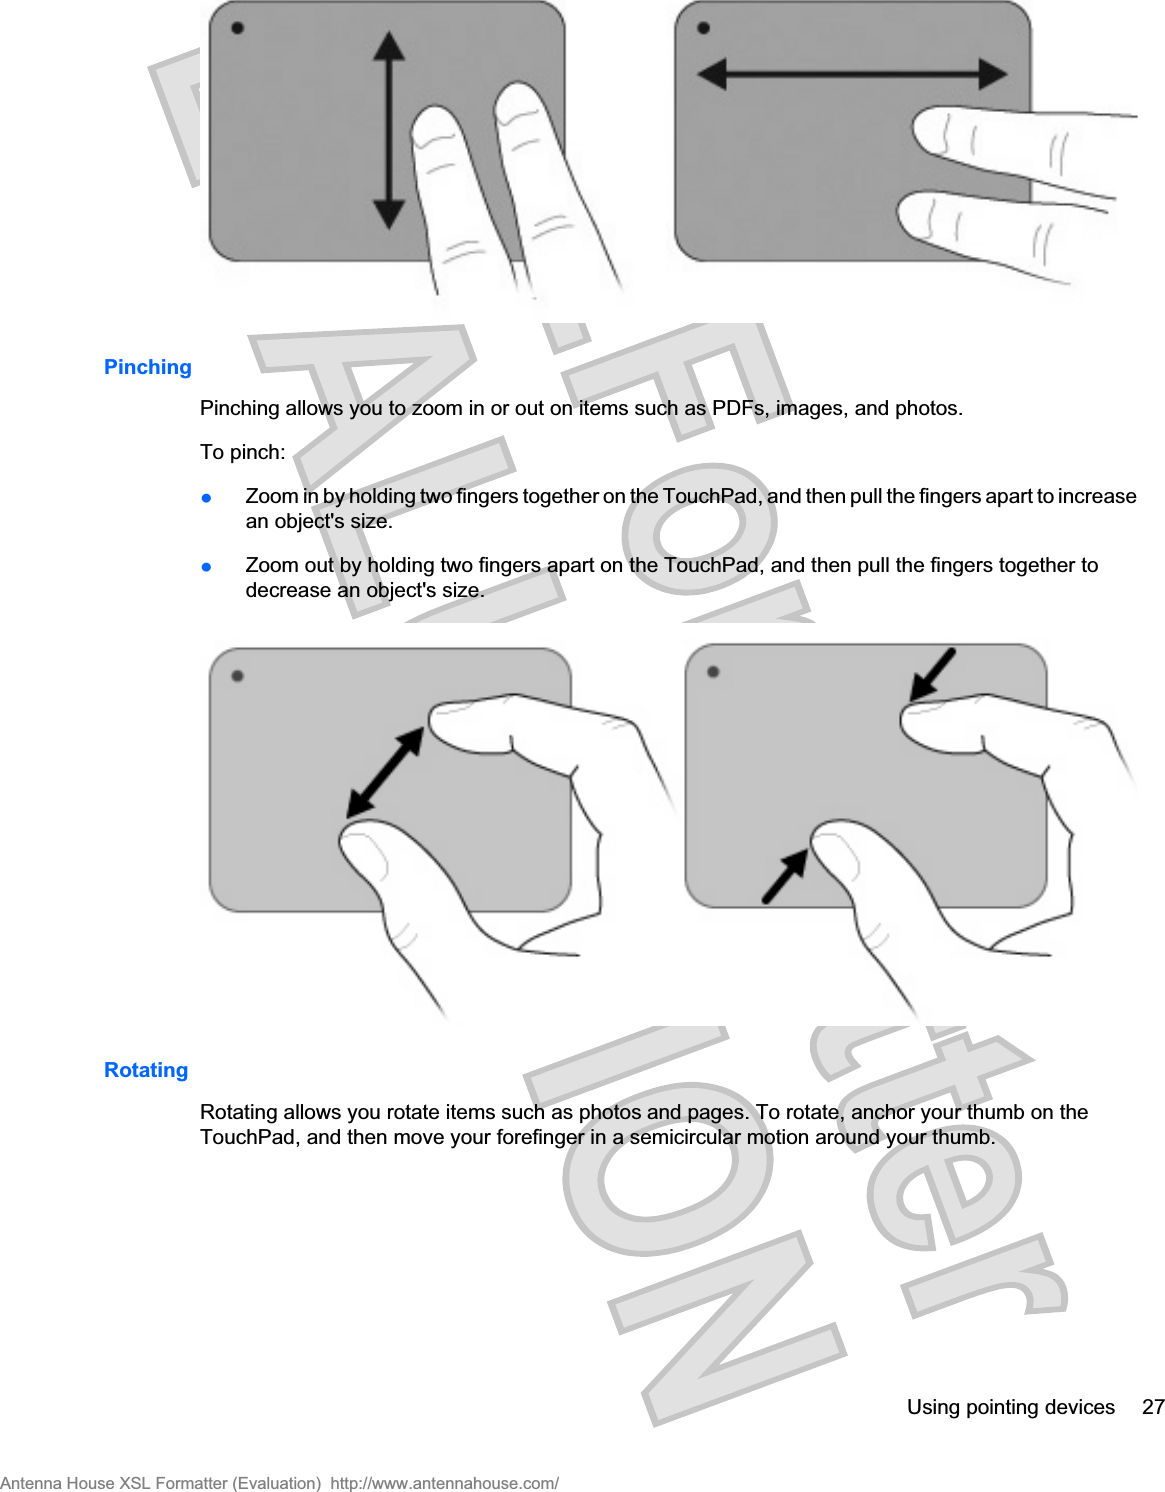 PinchingPinching allows you to zoom in or out on items such as PDFs, images, and photos.To pinch:łZoom in by holding two fingers together on the TouchPad, and then pull the fingers apart to increasean object&apos;s size.łZoom out by holding two fingers apart on the TouchPad, and then pull the fingers together todecrease an object&apos;s size.RotatingRotating allows you rotate items such as photos and pages. To rotate, anchor your thumb on theTouchPad, and then move your forefinger in a semicircular motion around your thumb.Using pointing devices 27Antenna House XSL Formatter (Evaluation)  http://www.antennahouse.com/